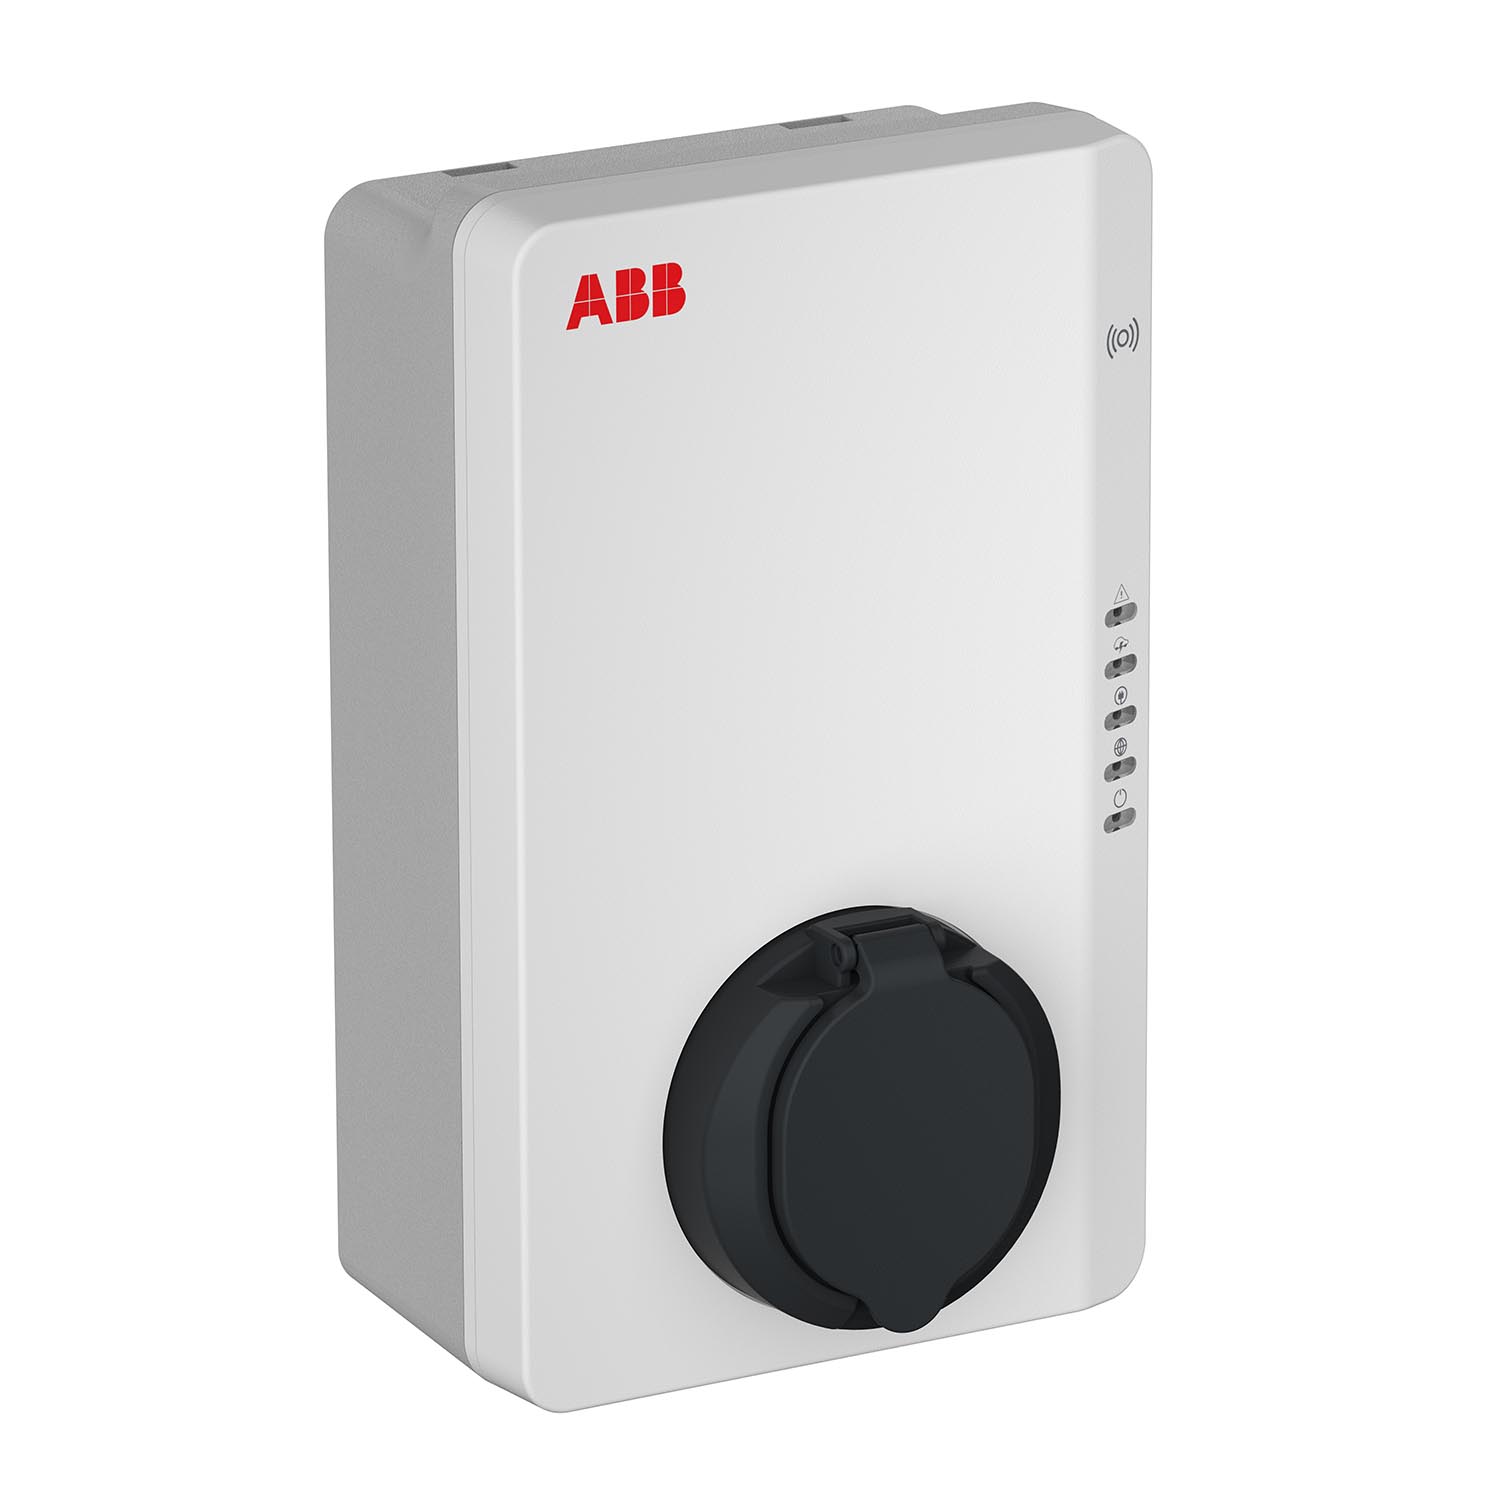 ABB Terra AC wallbox 22kW 32 Amp Type 2 Three Phase EV Charger with RFID  and 4G Connectivity